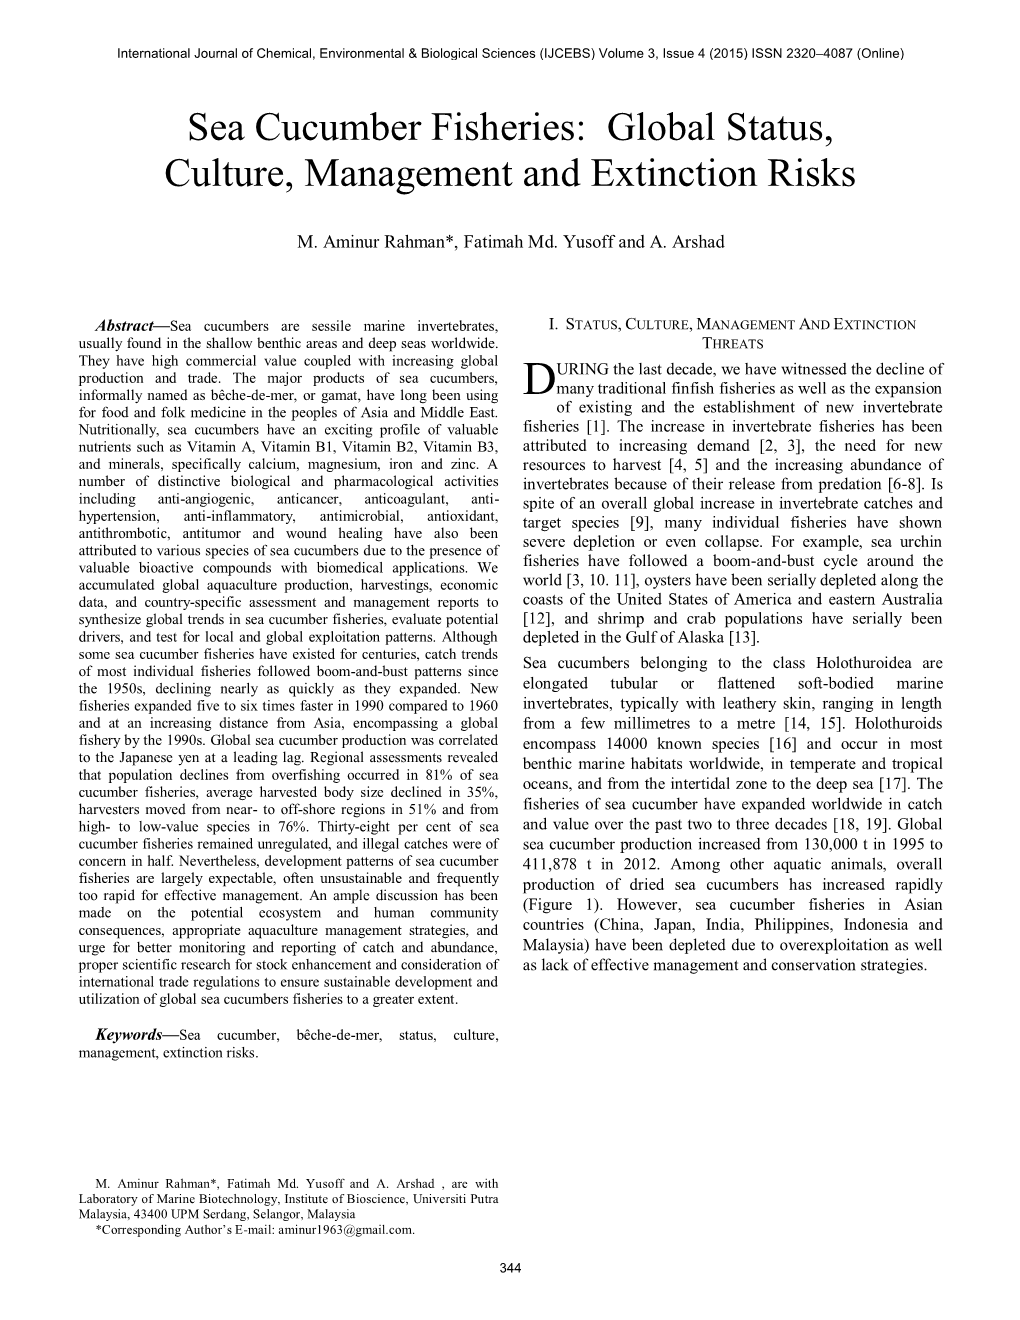 Sea Cucumber Fisheries: Global Status, Culture, Management and Extinction Risks